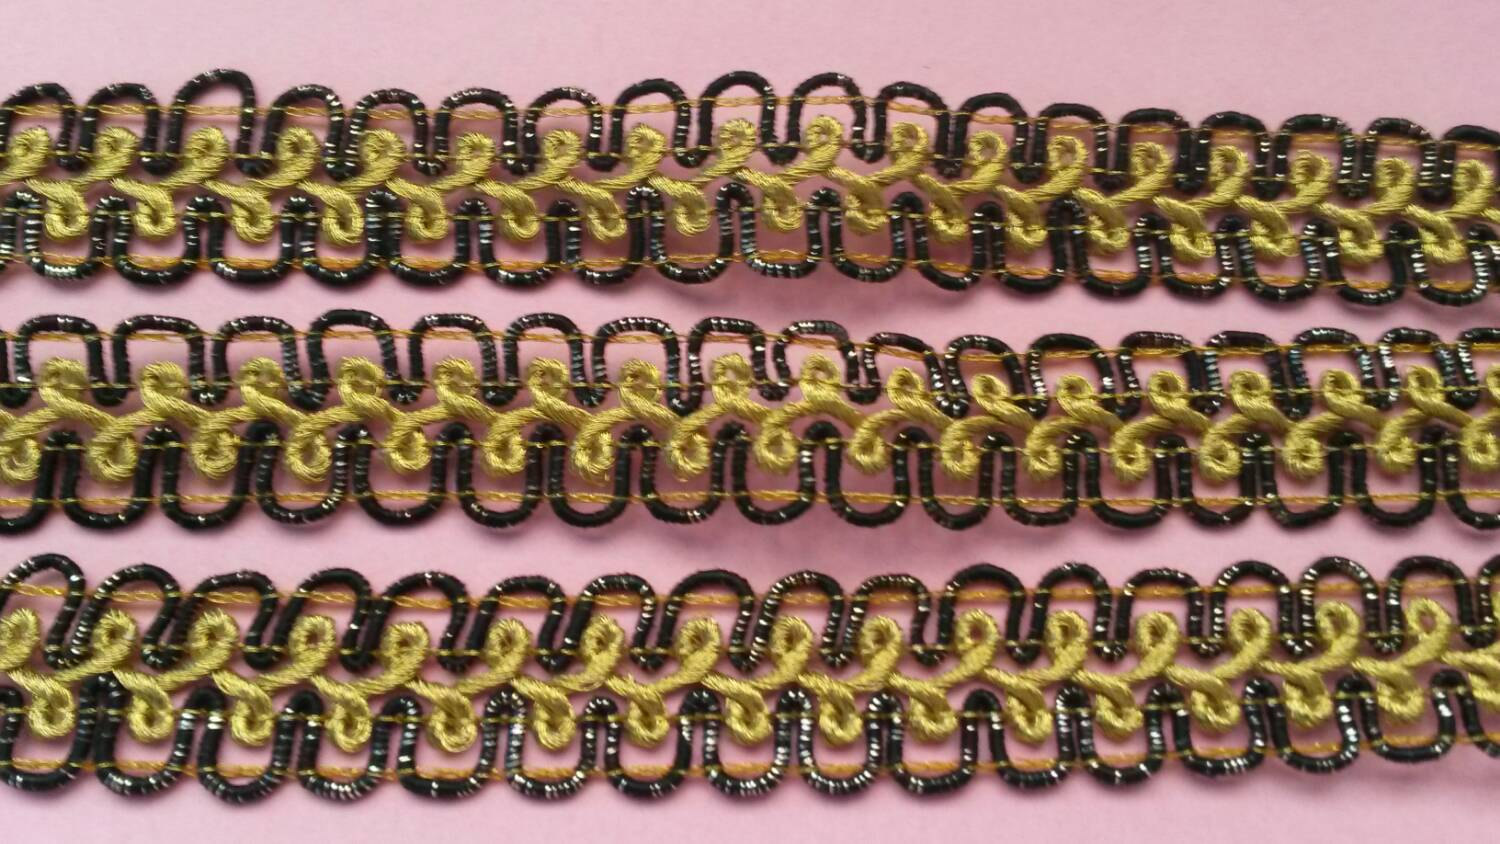 2 Yards Black and Gold Braided Lace Trim 3/4